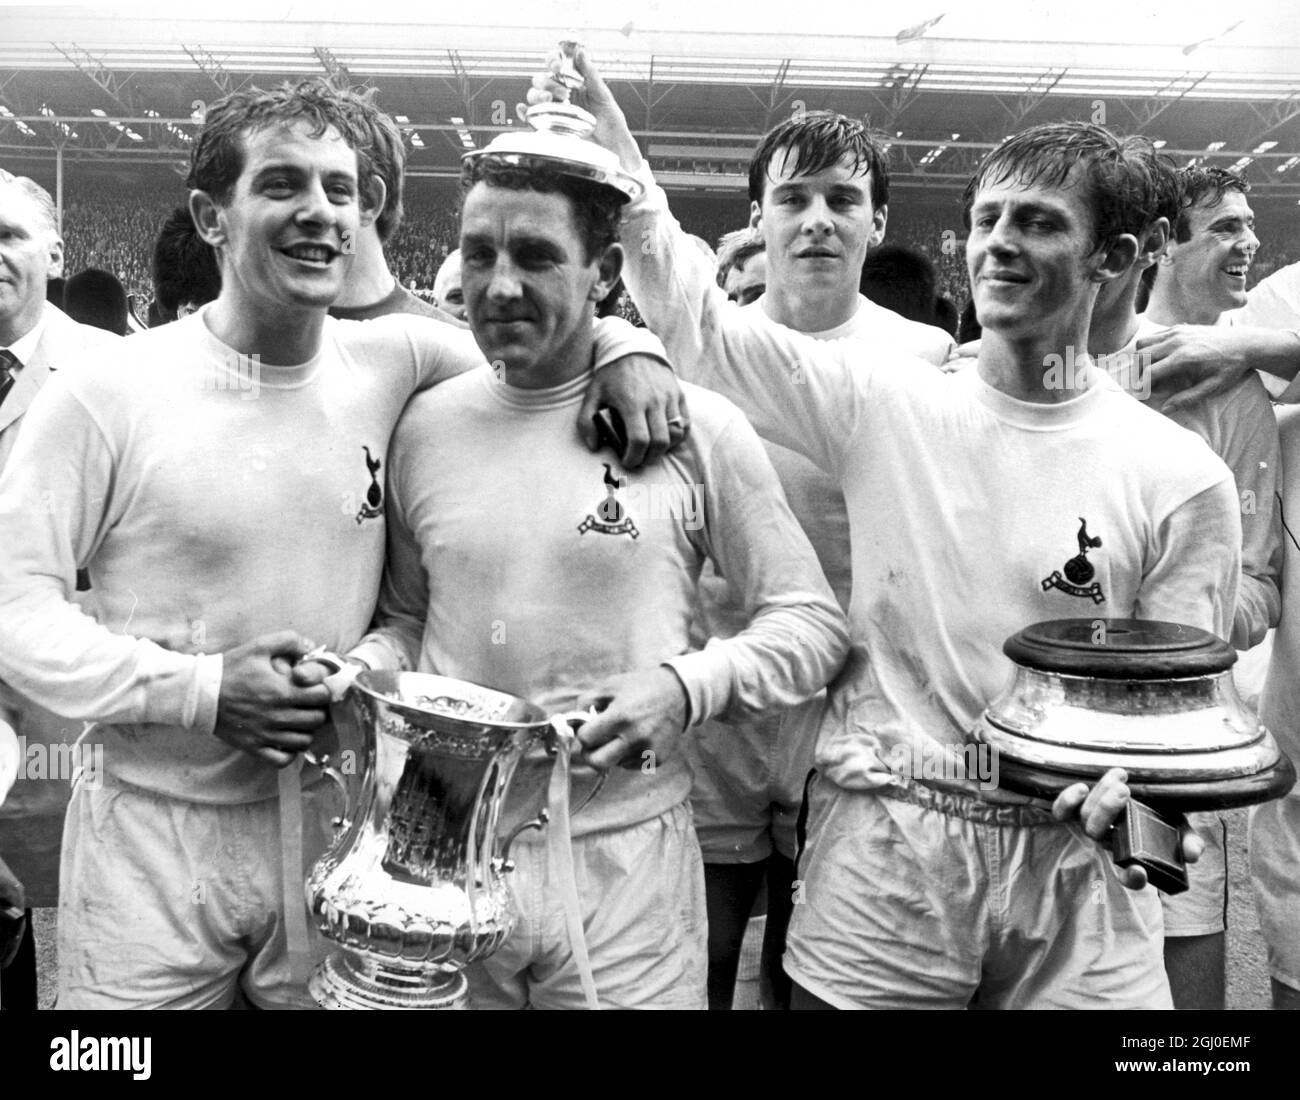 1967 FA Cup Final Chelsea v Tottenham Hotspur Spurs captain Dave Mackay is crowned by team-mate Jimmy Robertson (right) afterTottenham had defeated Chelsea by 2-1 in the FA Cup Final at Wembley. 20th May 1967. Stock Photo